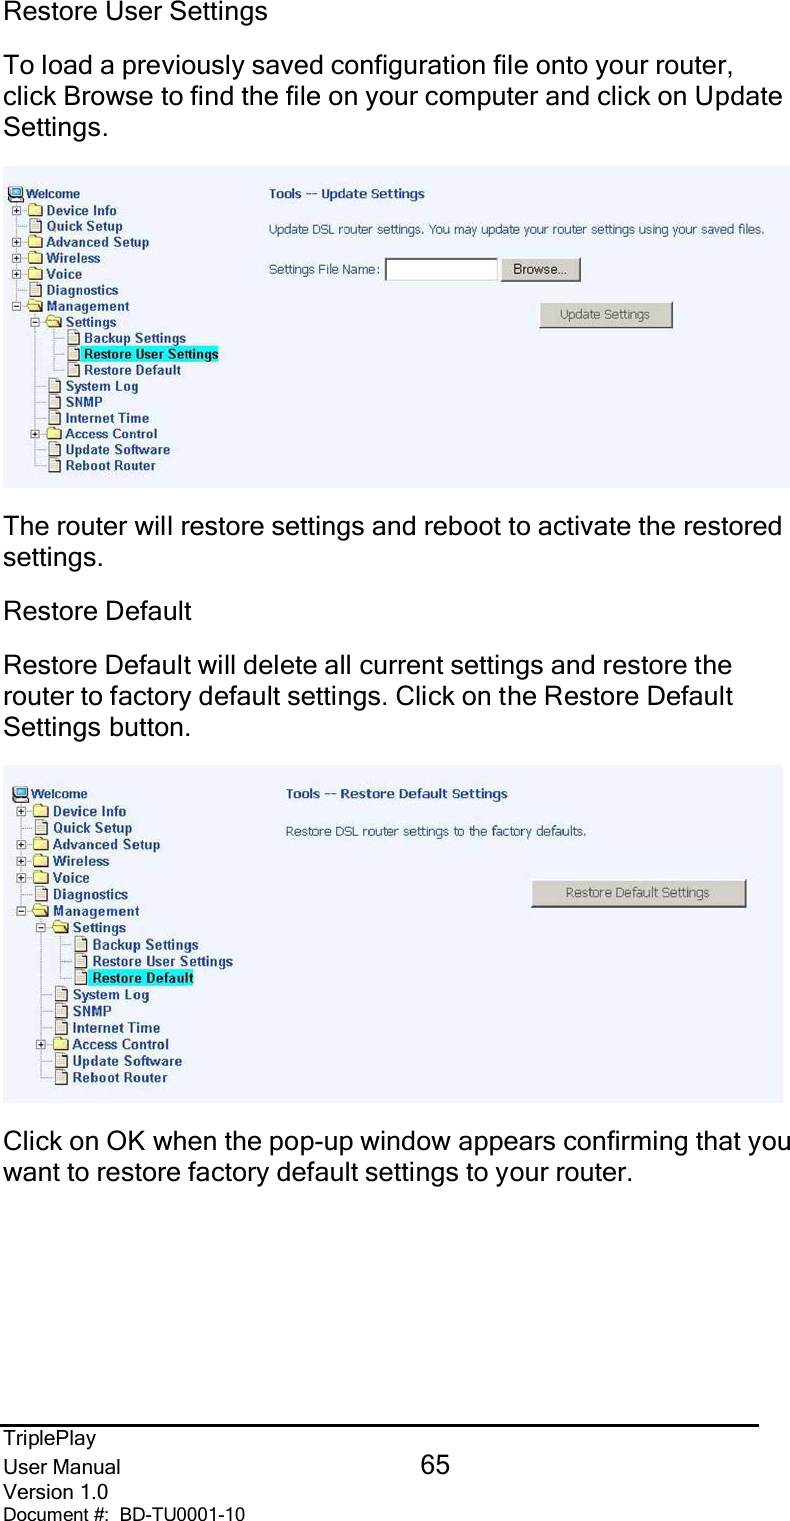 TriplePlayUser Manual 65Version 1.0Document #:  BD-TU0001-10Restore User SettingsTo load a previously saved configuration file onto your router,click Browse to find the file on your computer and click on UpdateSettings.The router will restore settings and reboot to activate the restoredsettings.Restore DefaultRestore Default will delete all current settings and restore therouter to factory default settings. Click on the Restore DefaultSettings button.Click on OK when the pop-up window appears confirming that youwant to restore factory default settings to your router.